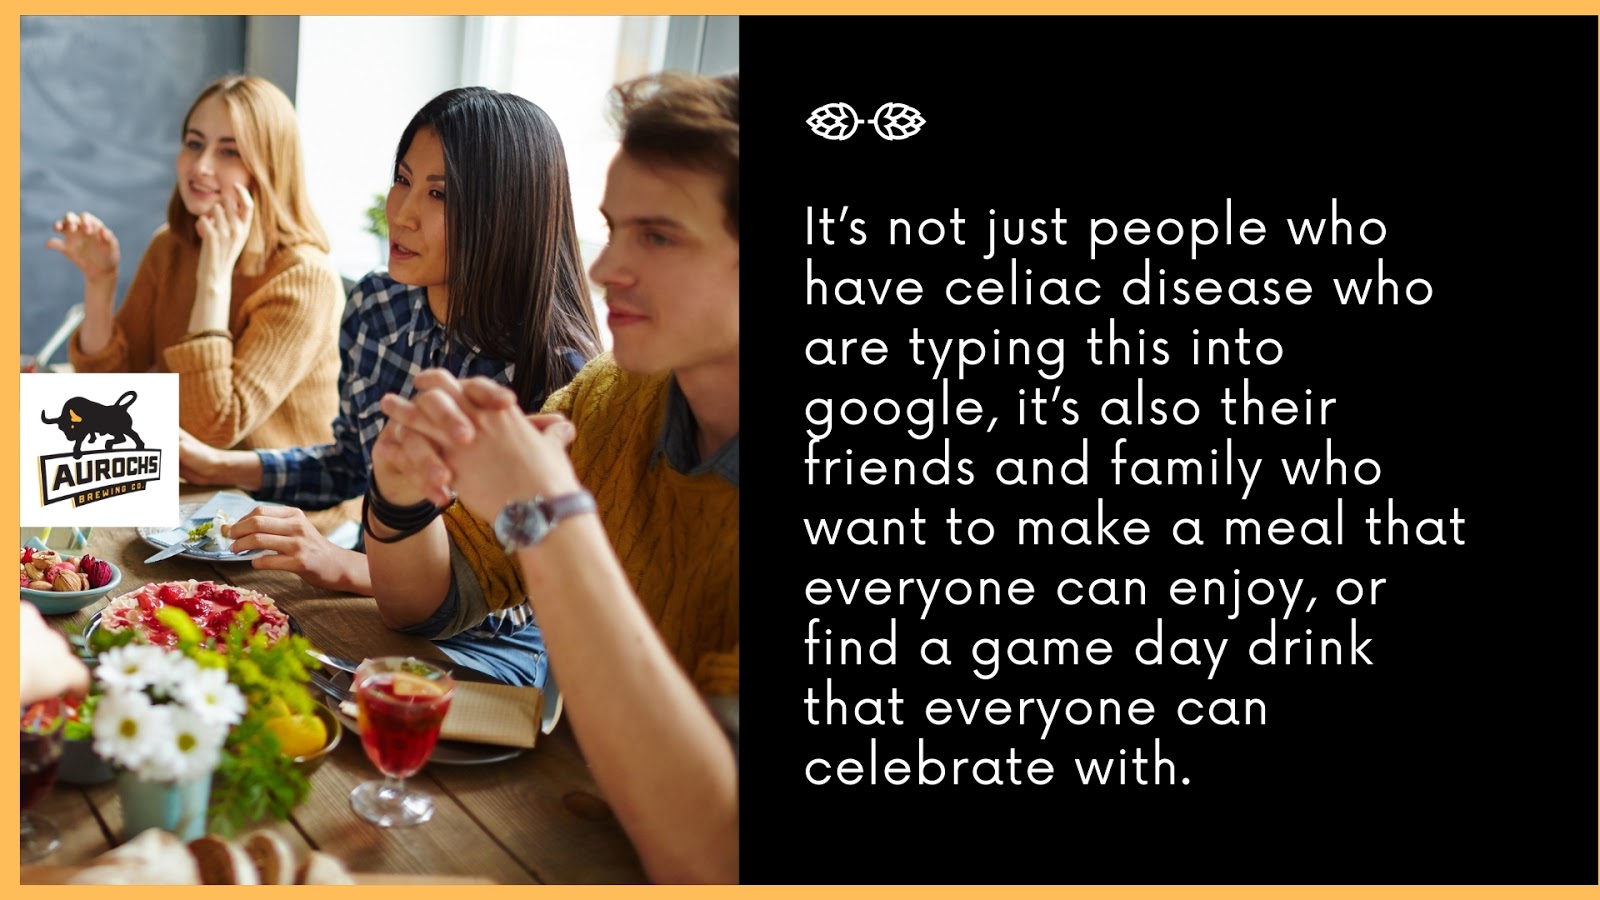 It’s not just people who have celiac disease who are typing this into google, it’s also their friends and family